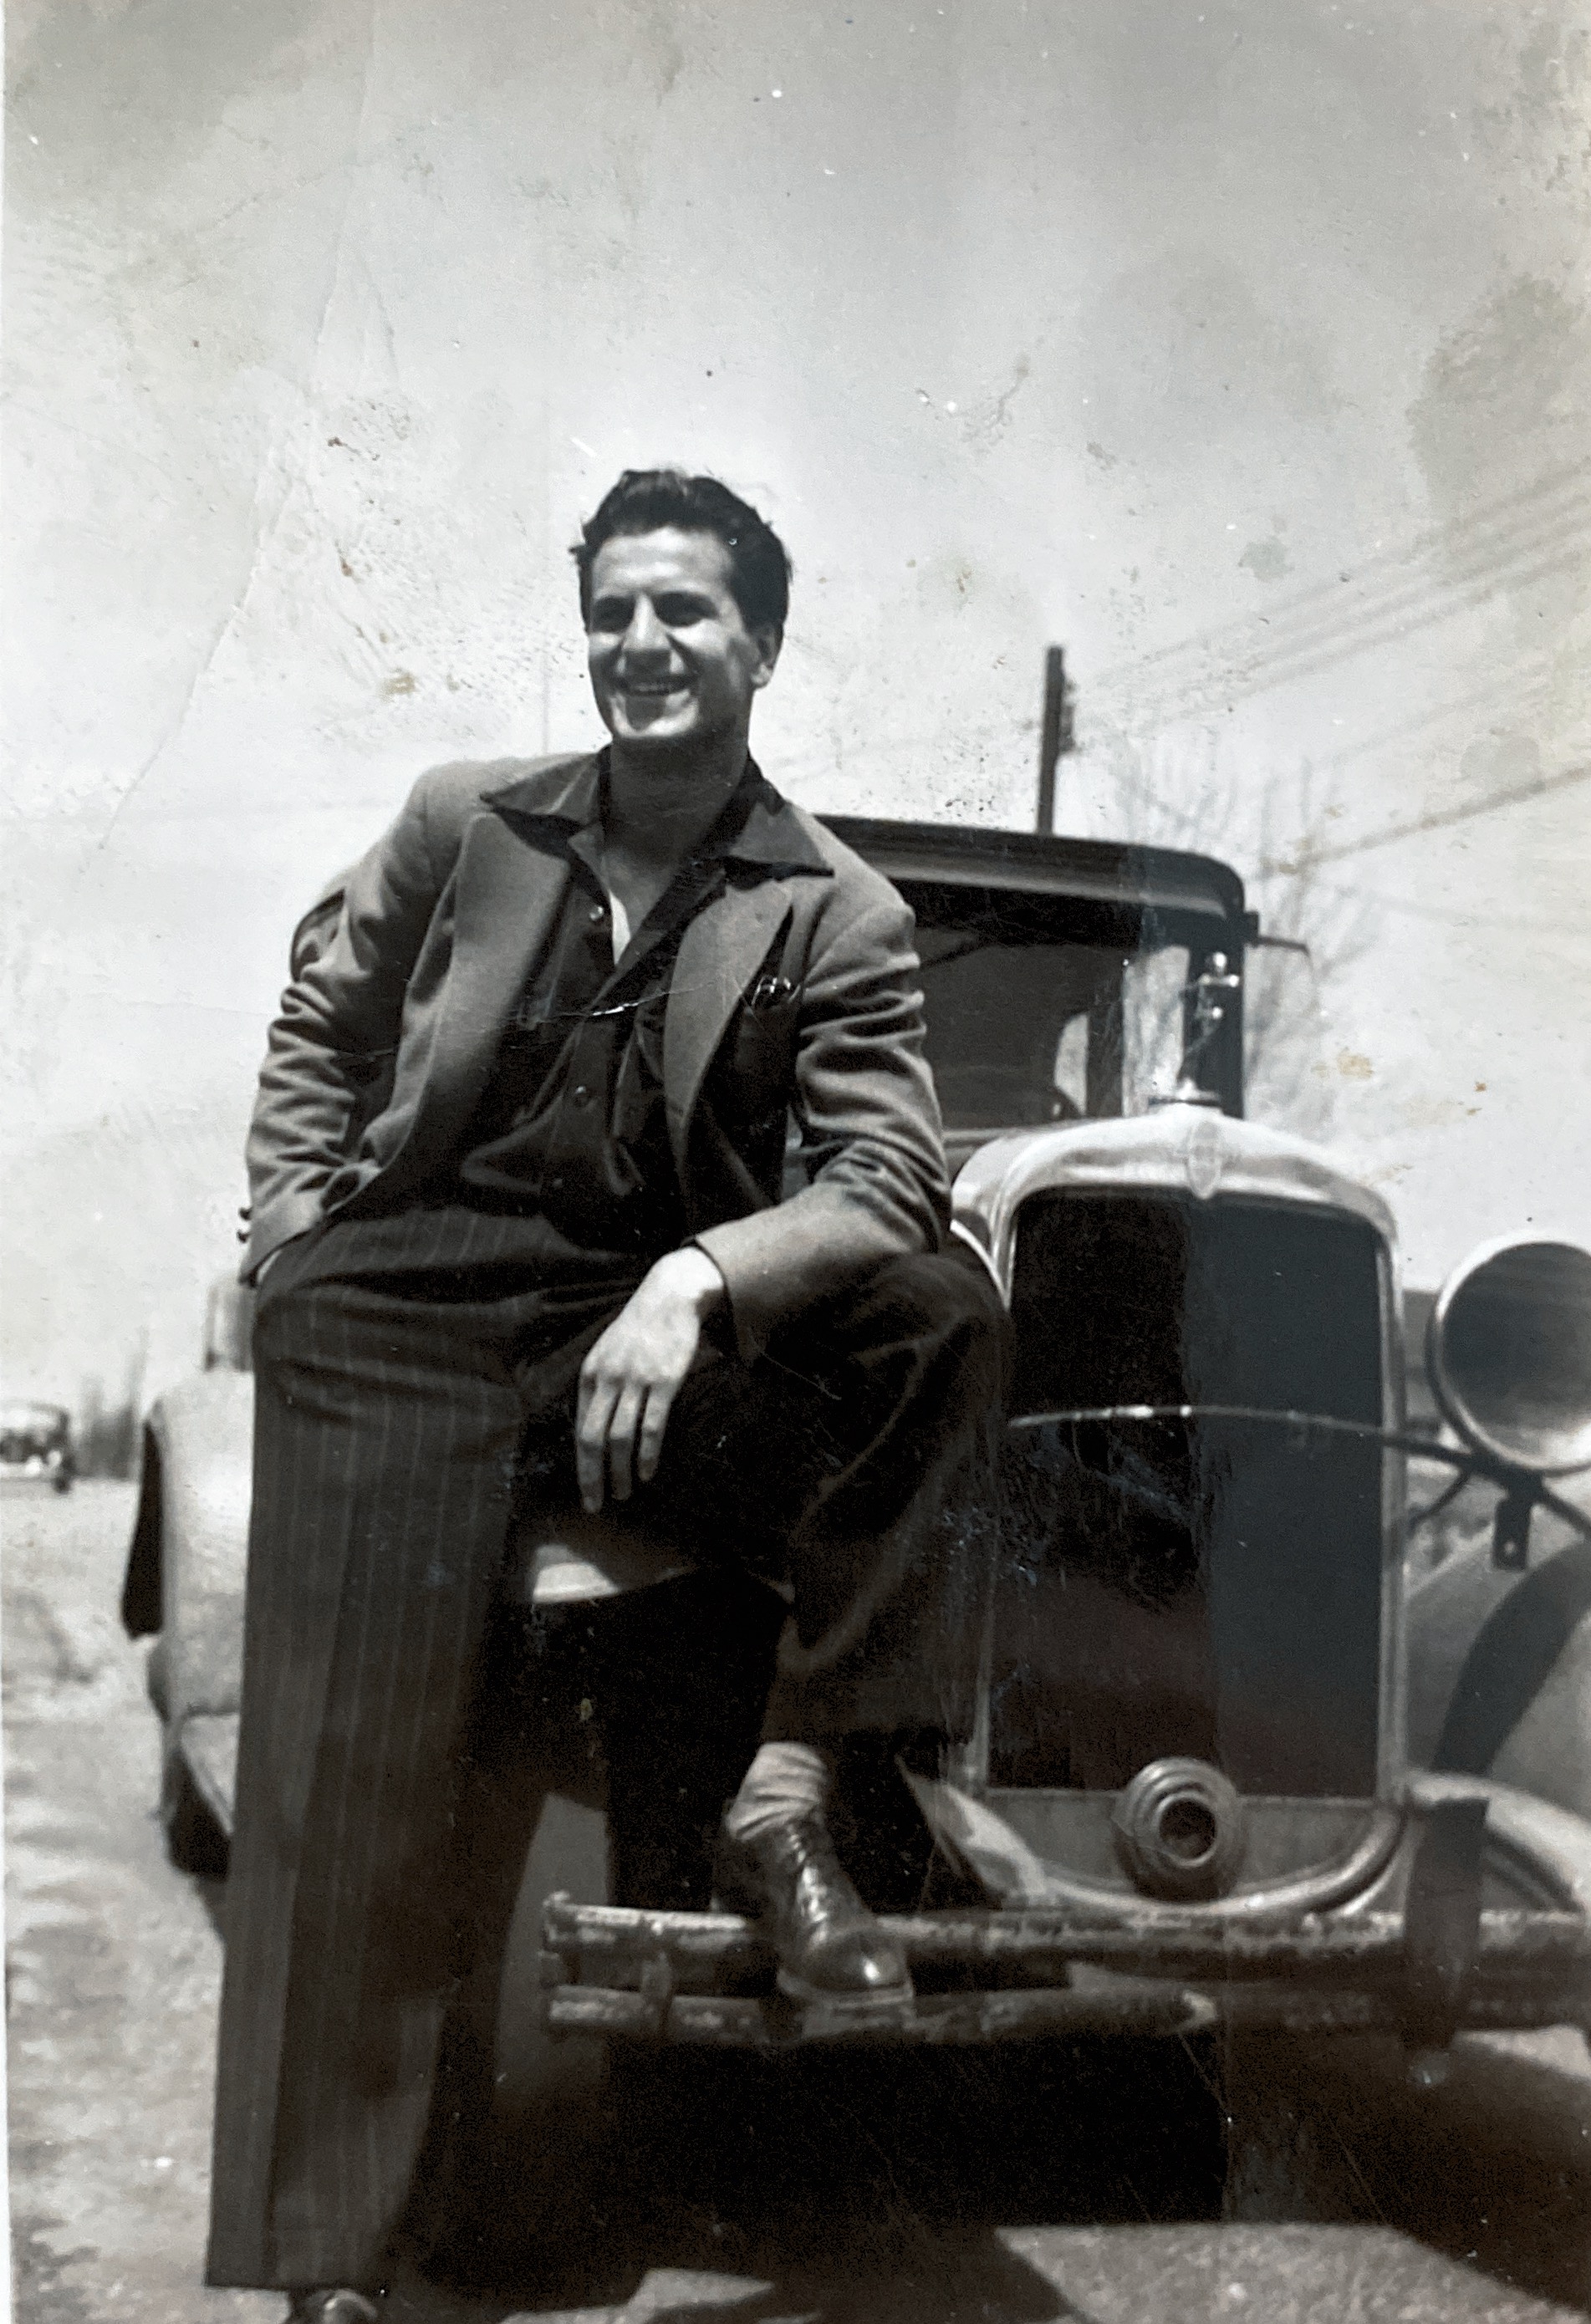 Walter and his Chevy 1941